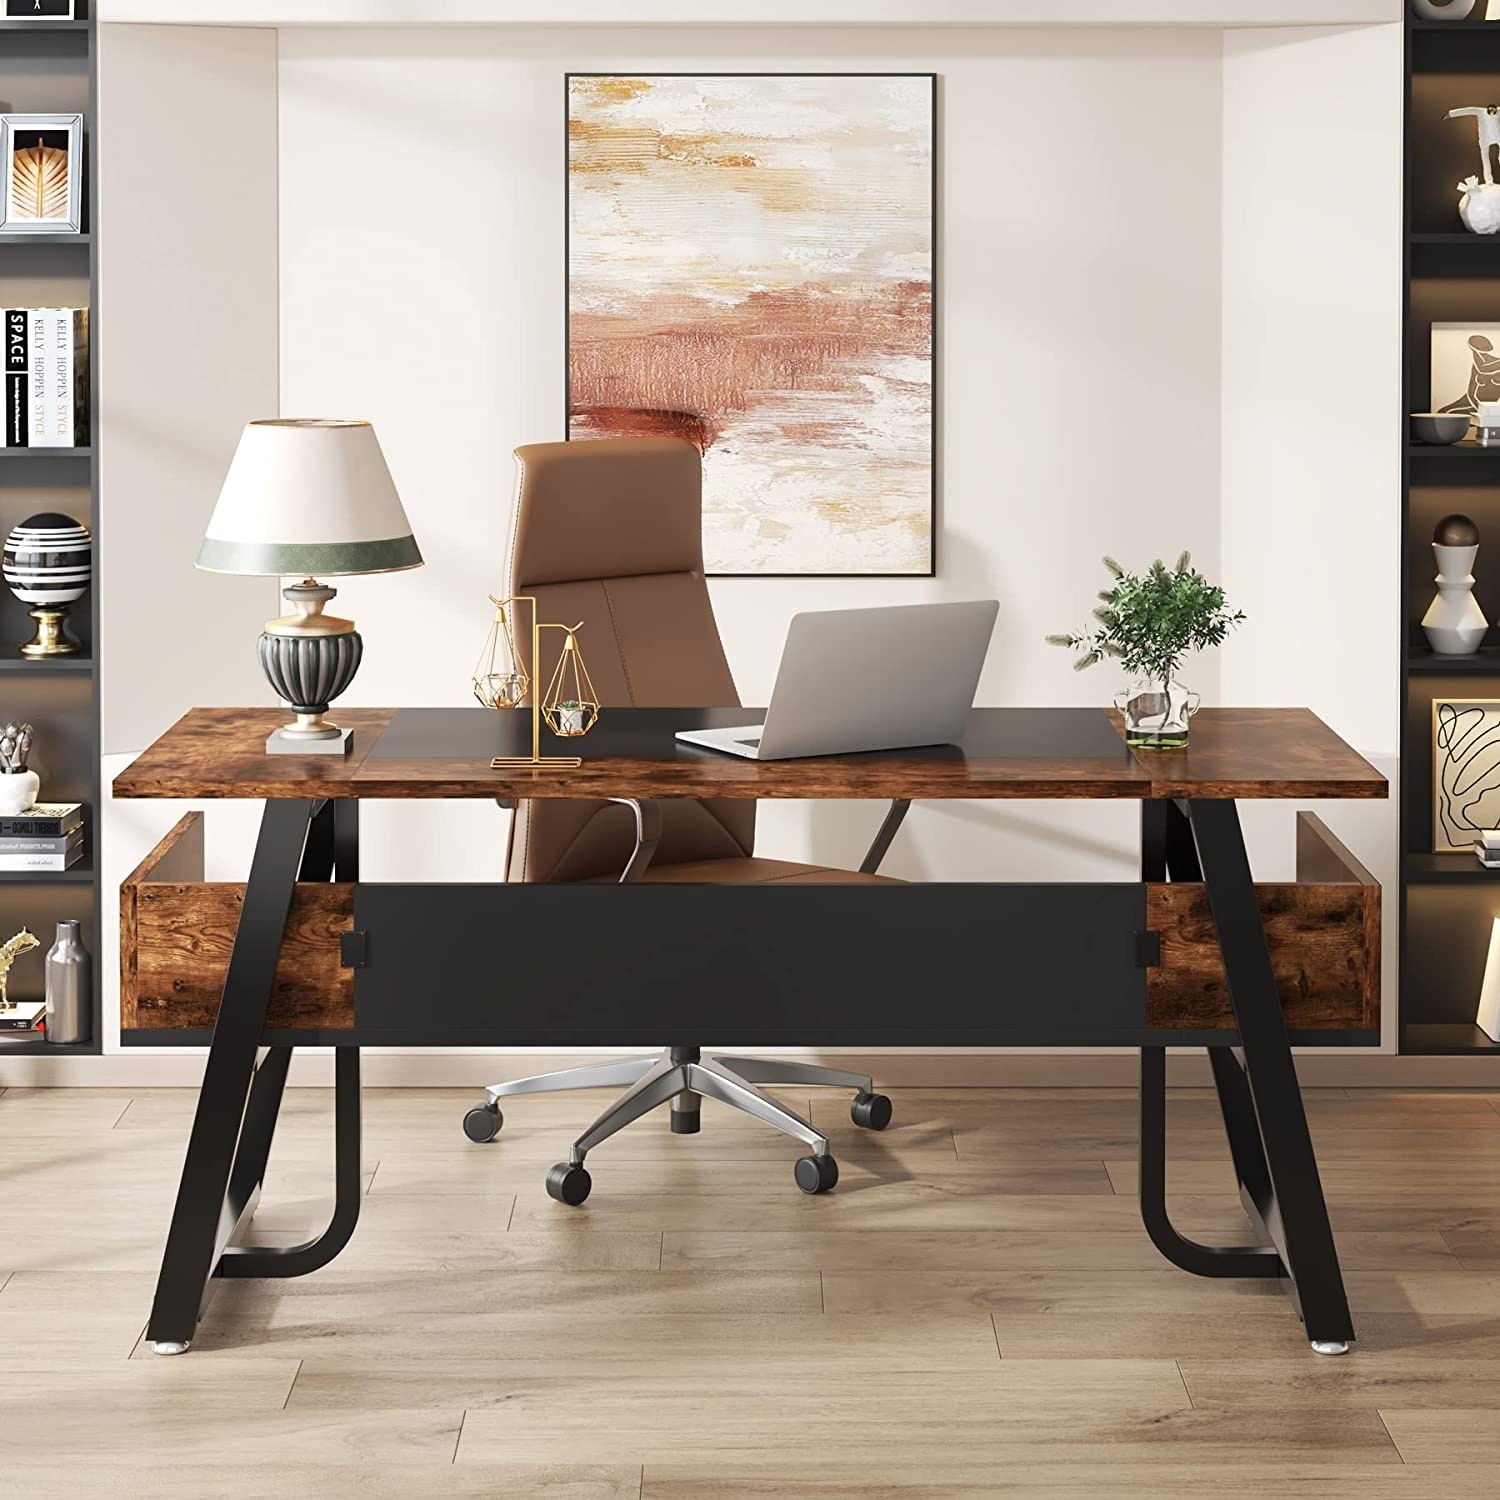 https://ak1.ostkcdn.com/images/products/is/images/direct/197d747d588f622cd0427d37abac03b2c62448bf/63-inch-Large-Executive-Desk-Office-Desk-with-Storage-Shelf-for-Home-Office%2C-Rustic-Brown-Black.jpg